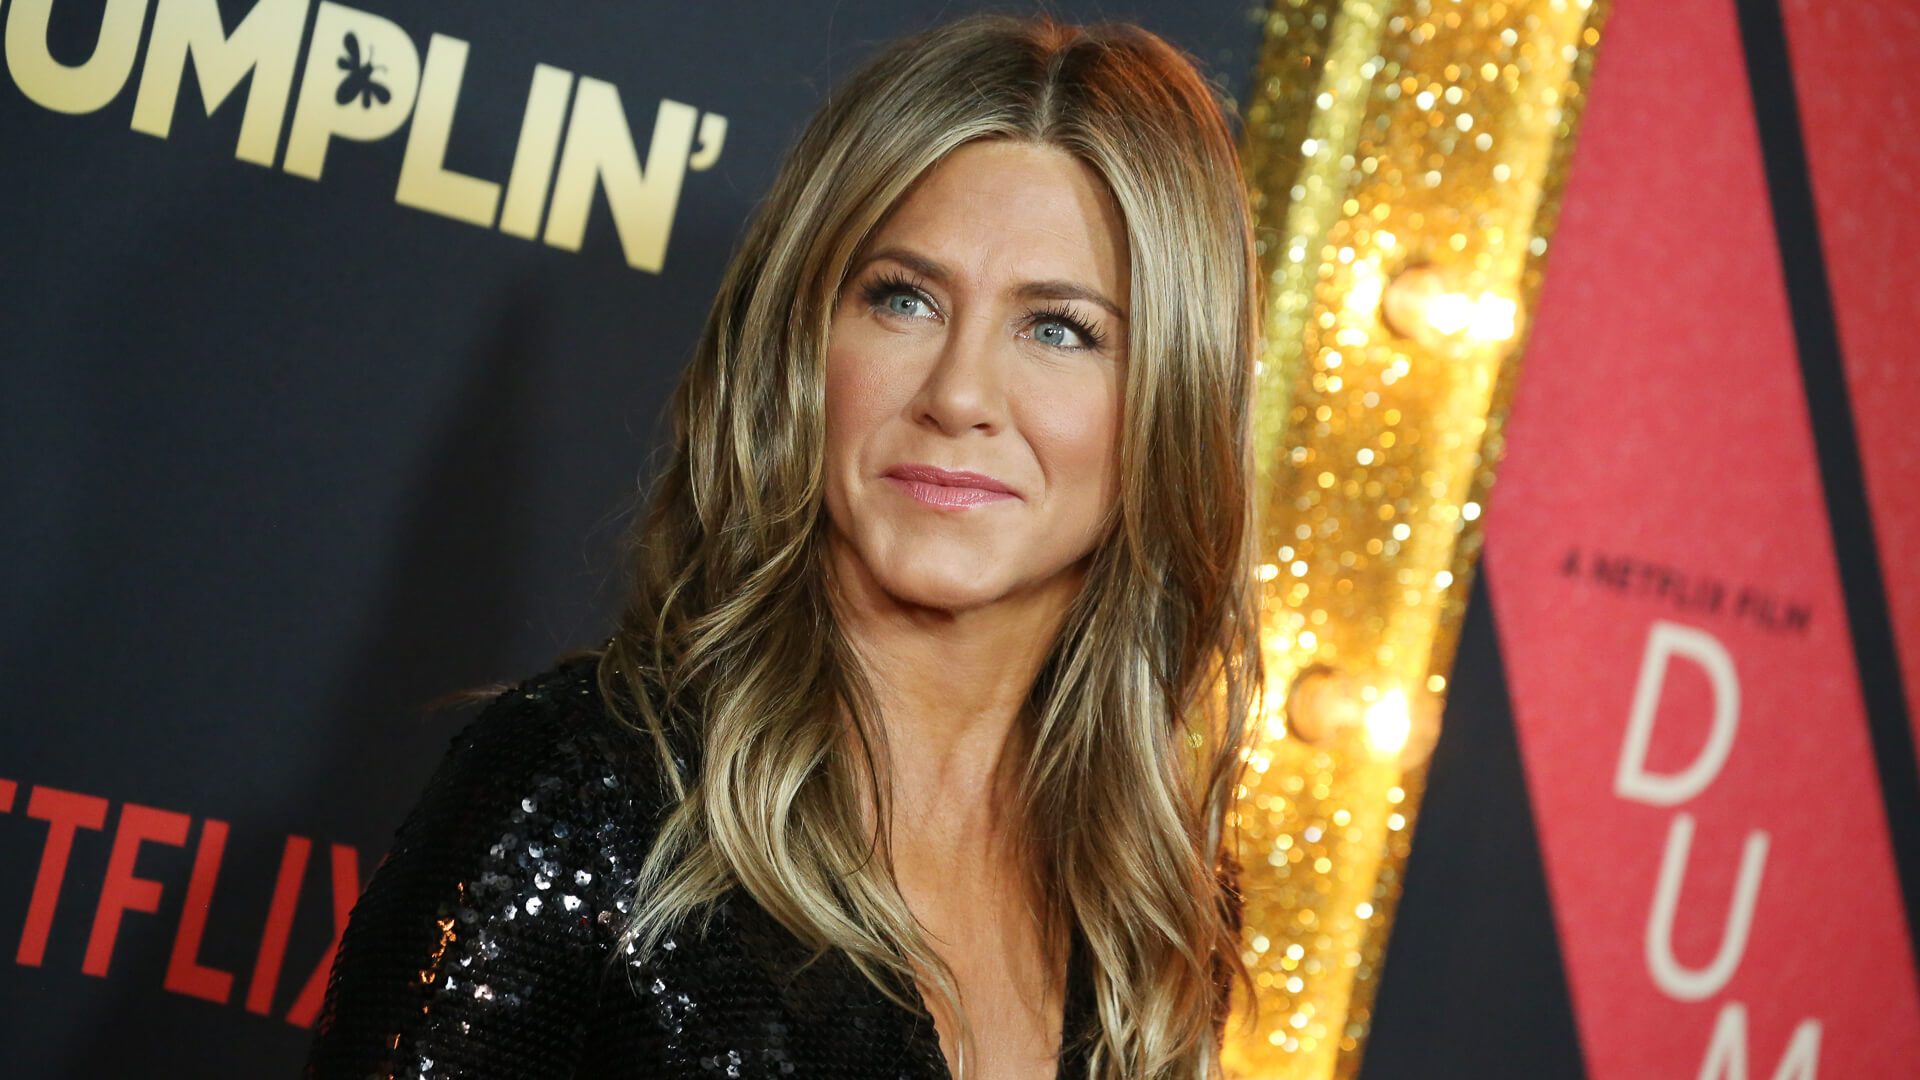 Here S How Much Jennifer Aniston And Other Actors Get Paid For Their Reruns Gobankingrates